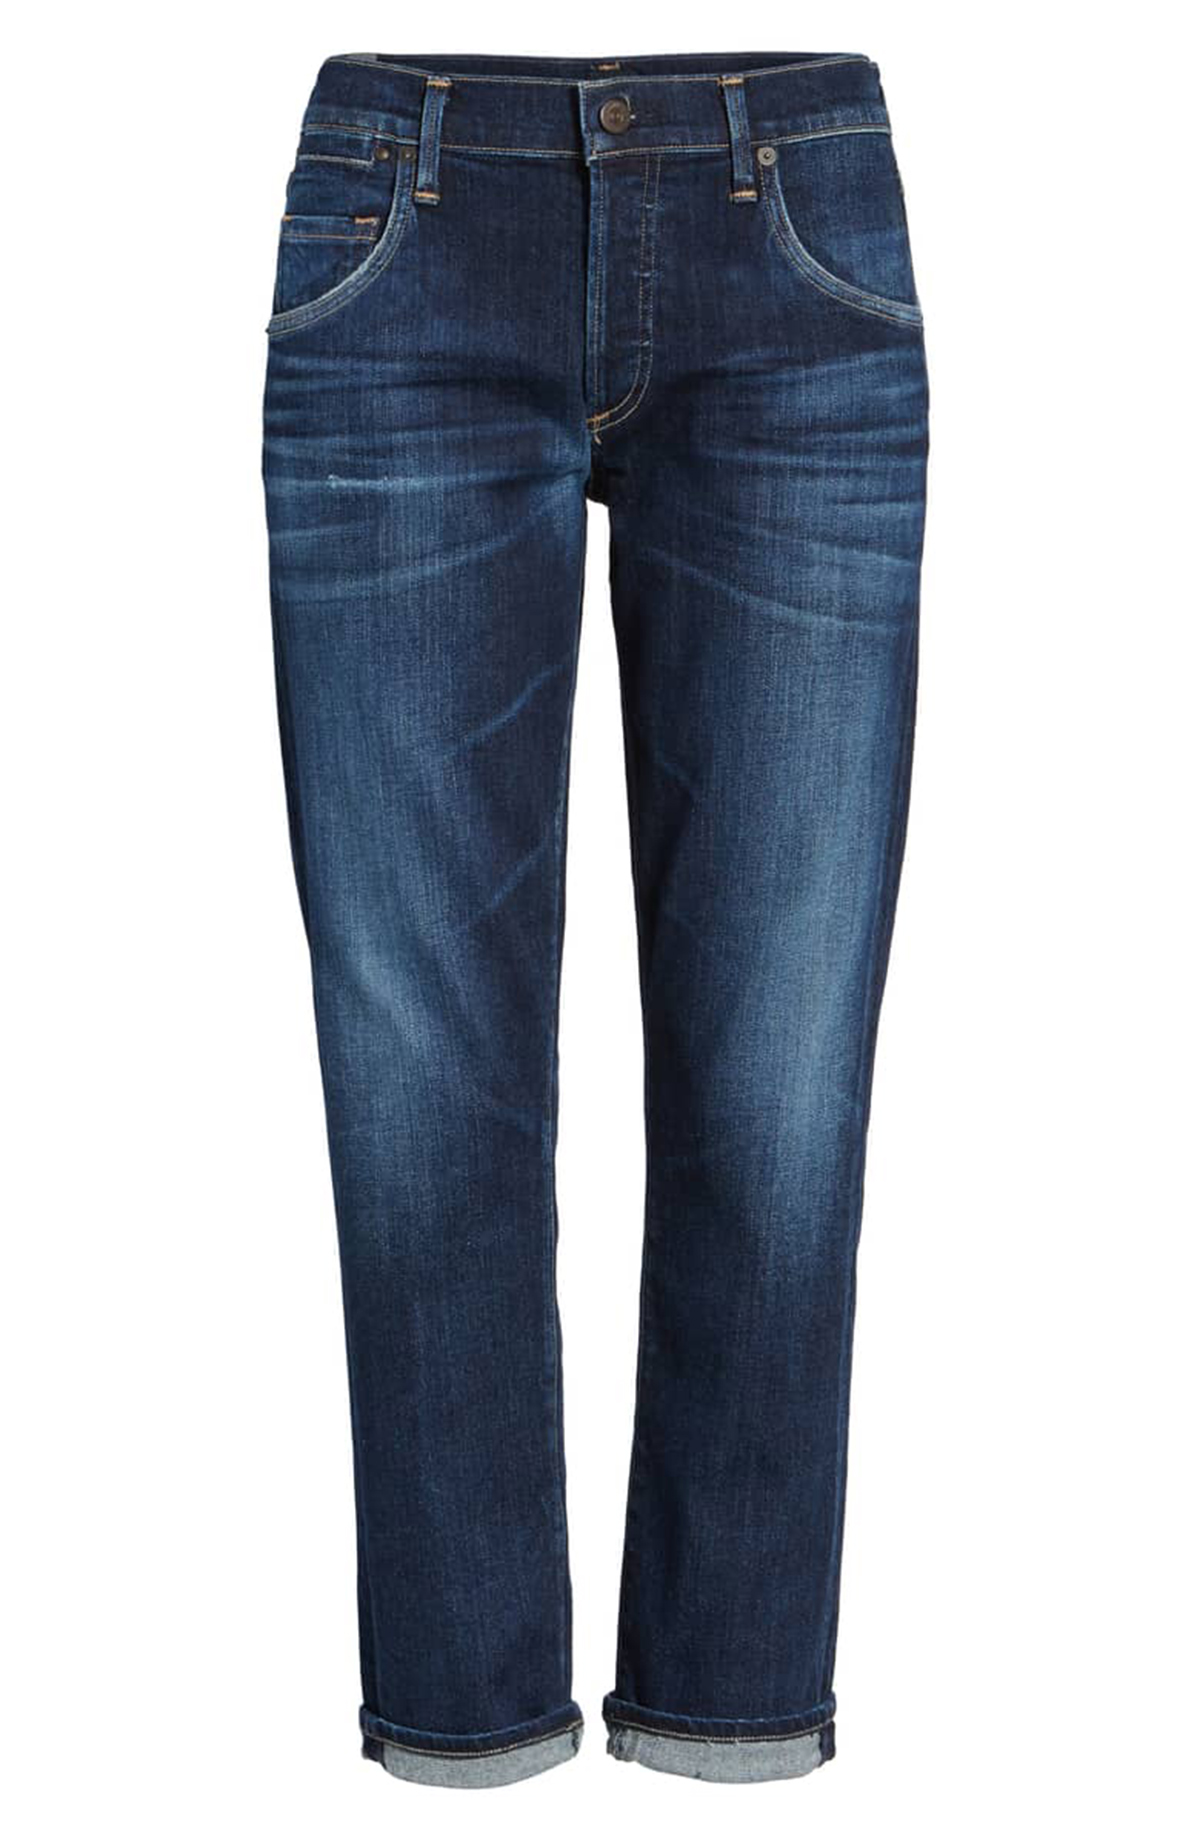 Best Jeans for Women: 11 Essential Denim Styles for All Body Types | Us ...